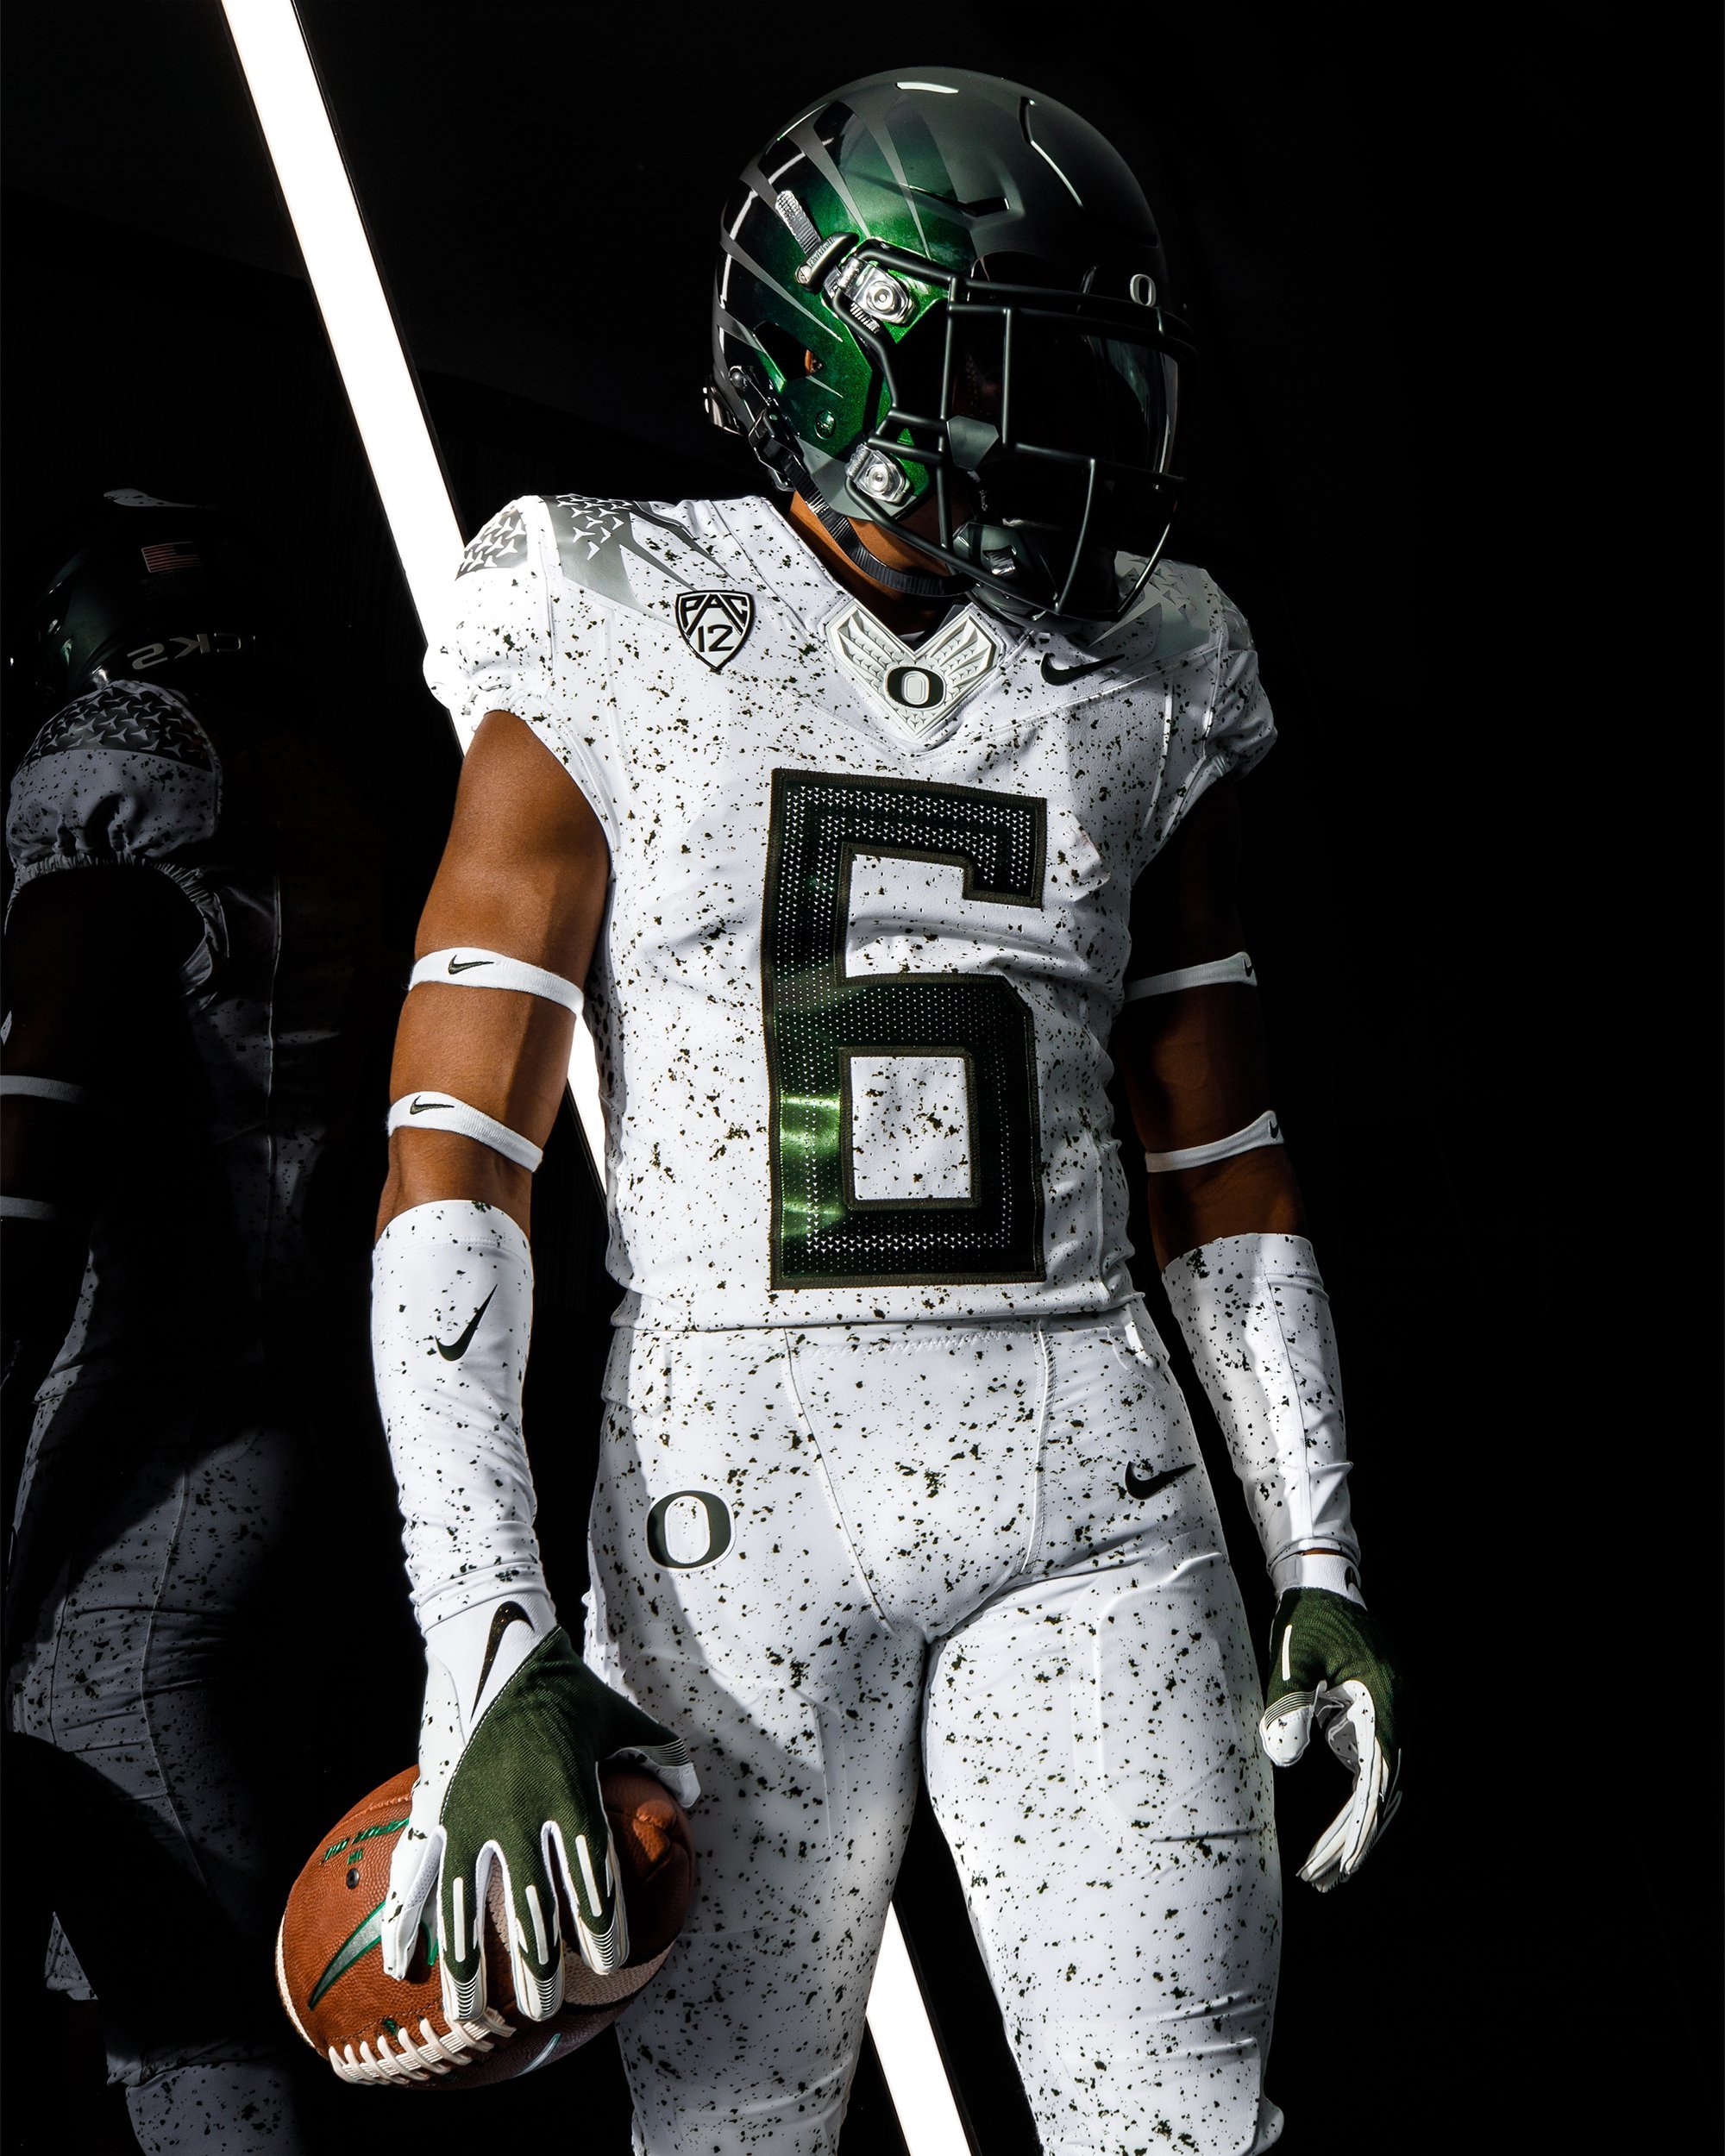 How Long Can Oregon Change Their Uniforms?